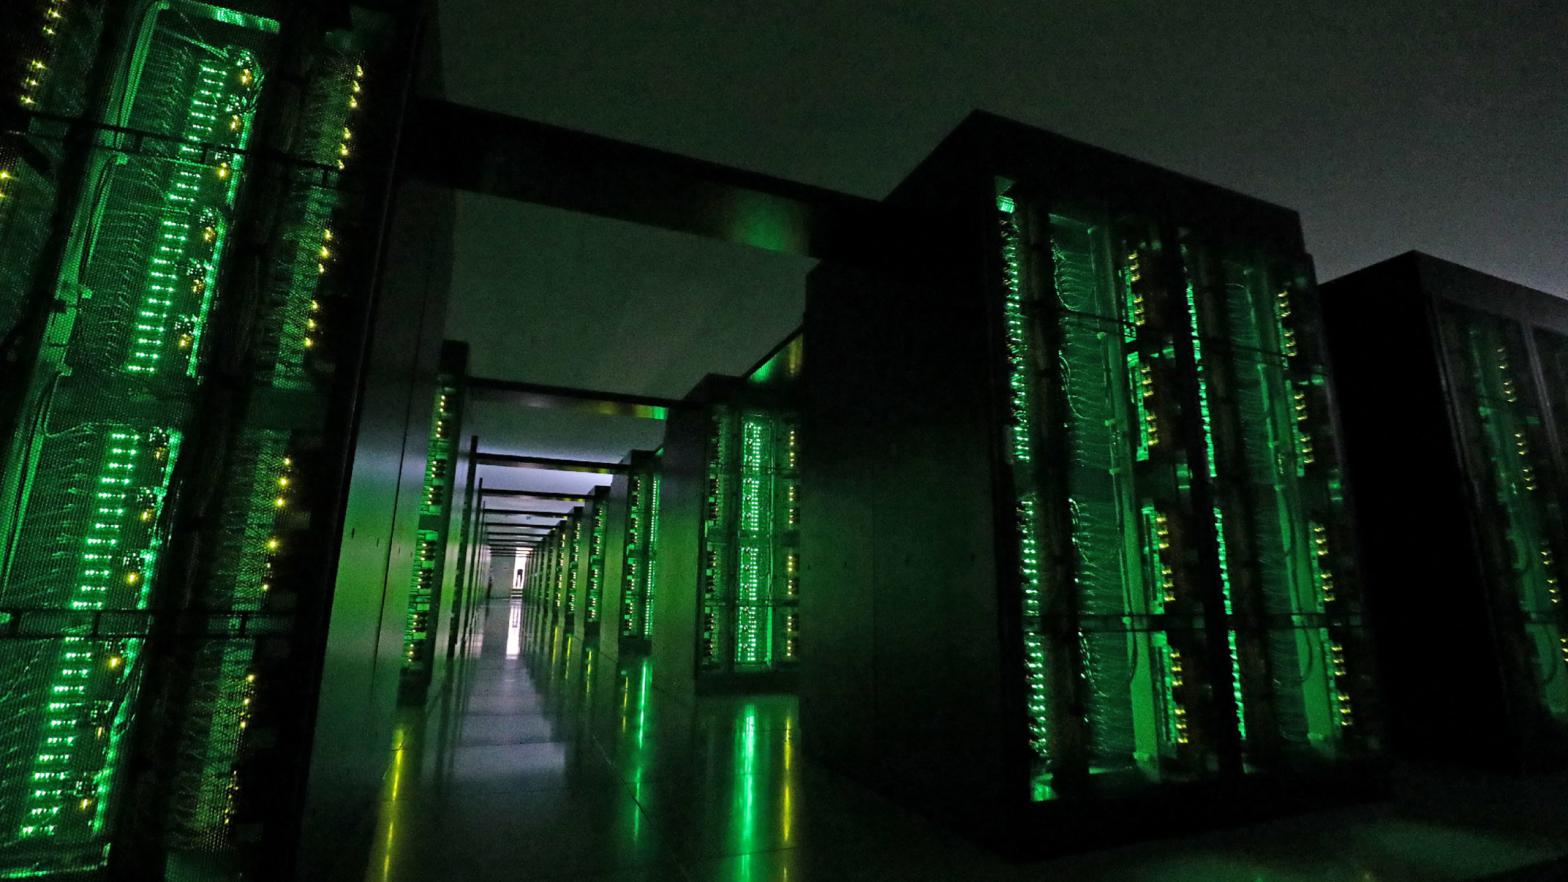 The Fugaku supercomputer at the Riken Centre for Computational Science in Kobe in June 2020. (Photo: STR/Jiji Press/AFP, Getty Images)